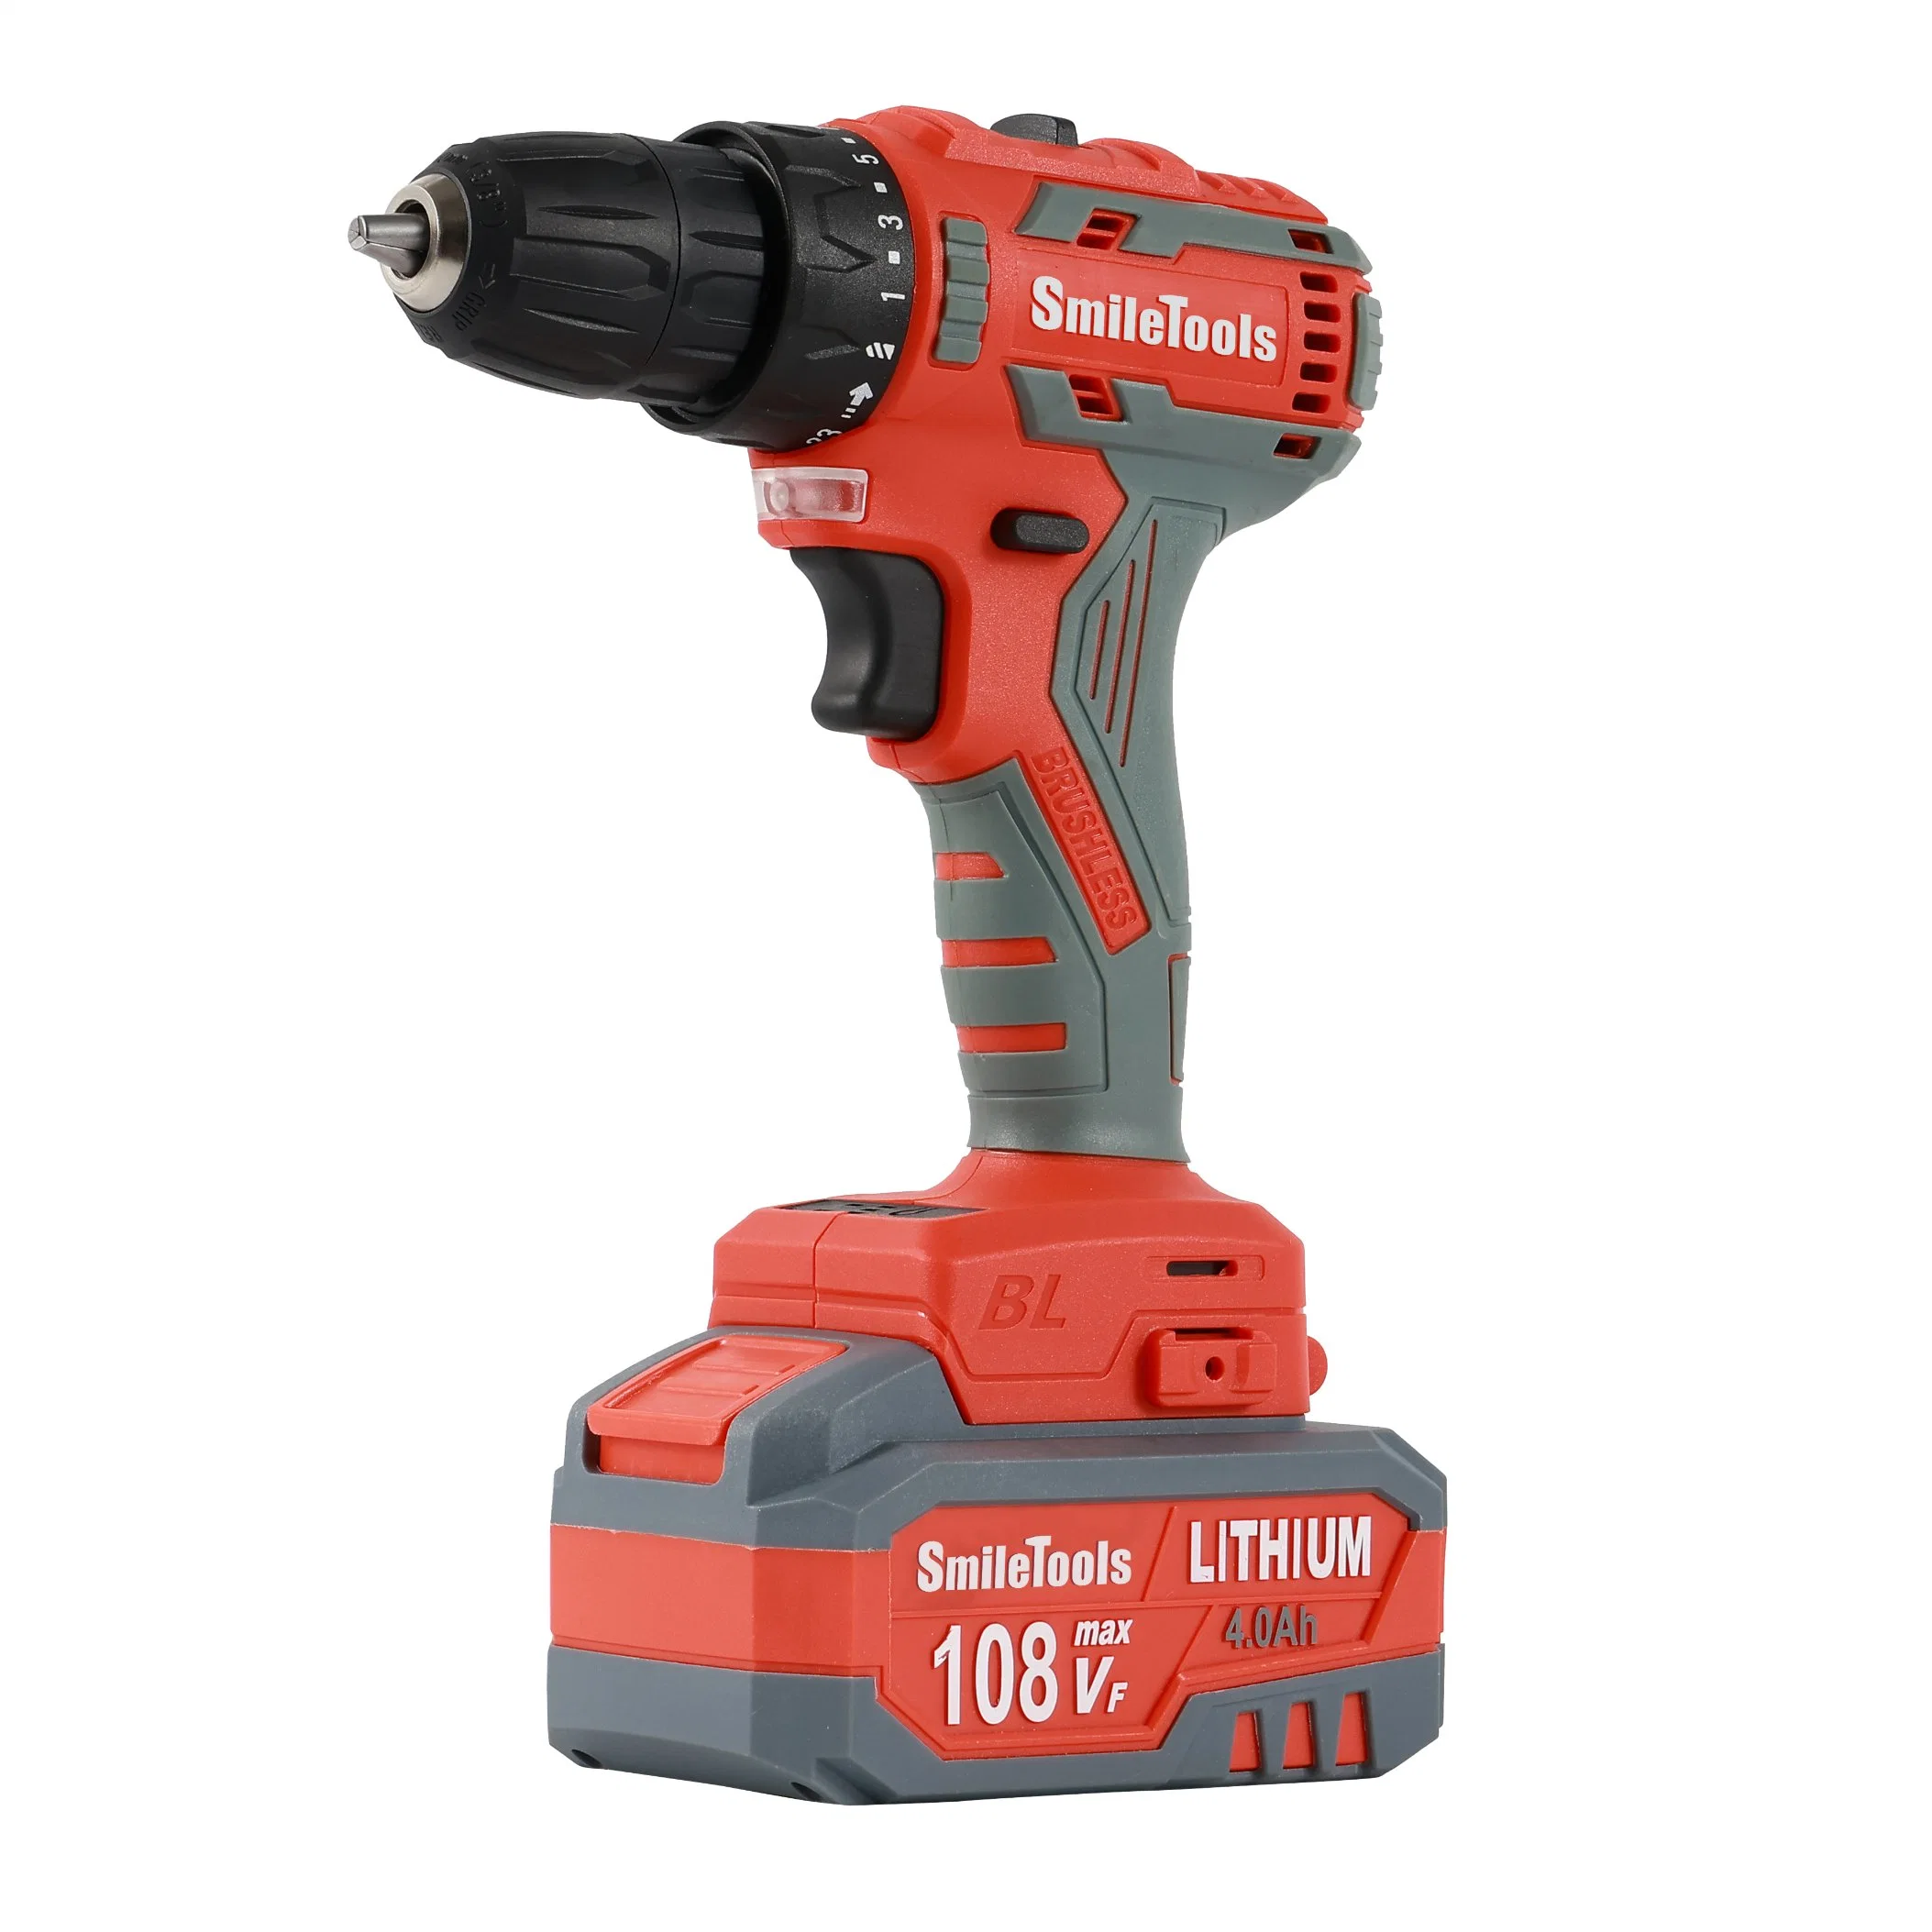 Cordless Drill Set Impact Wrench Combo Kits Cordless Drill Cutting Sets Lithium Battery Electric Power Tools